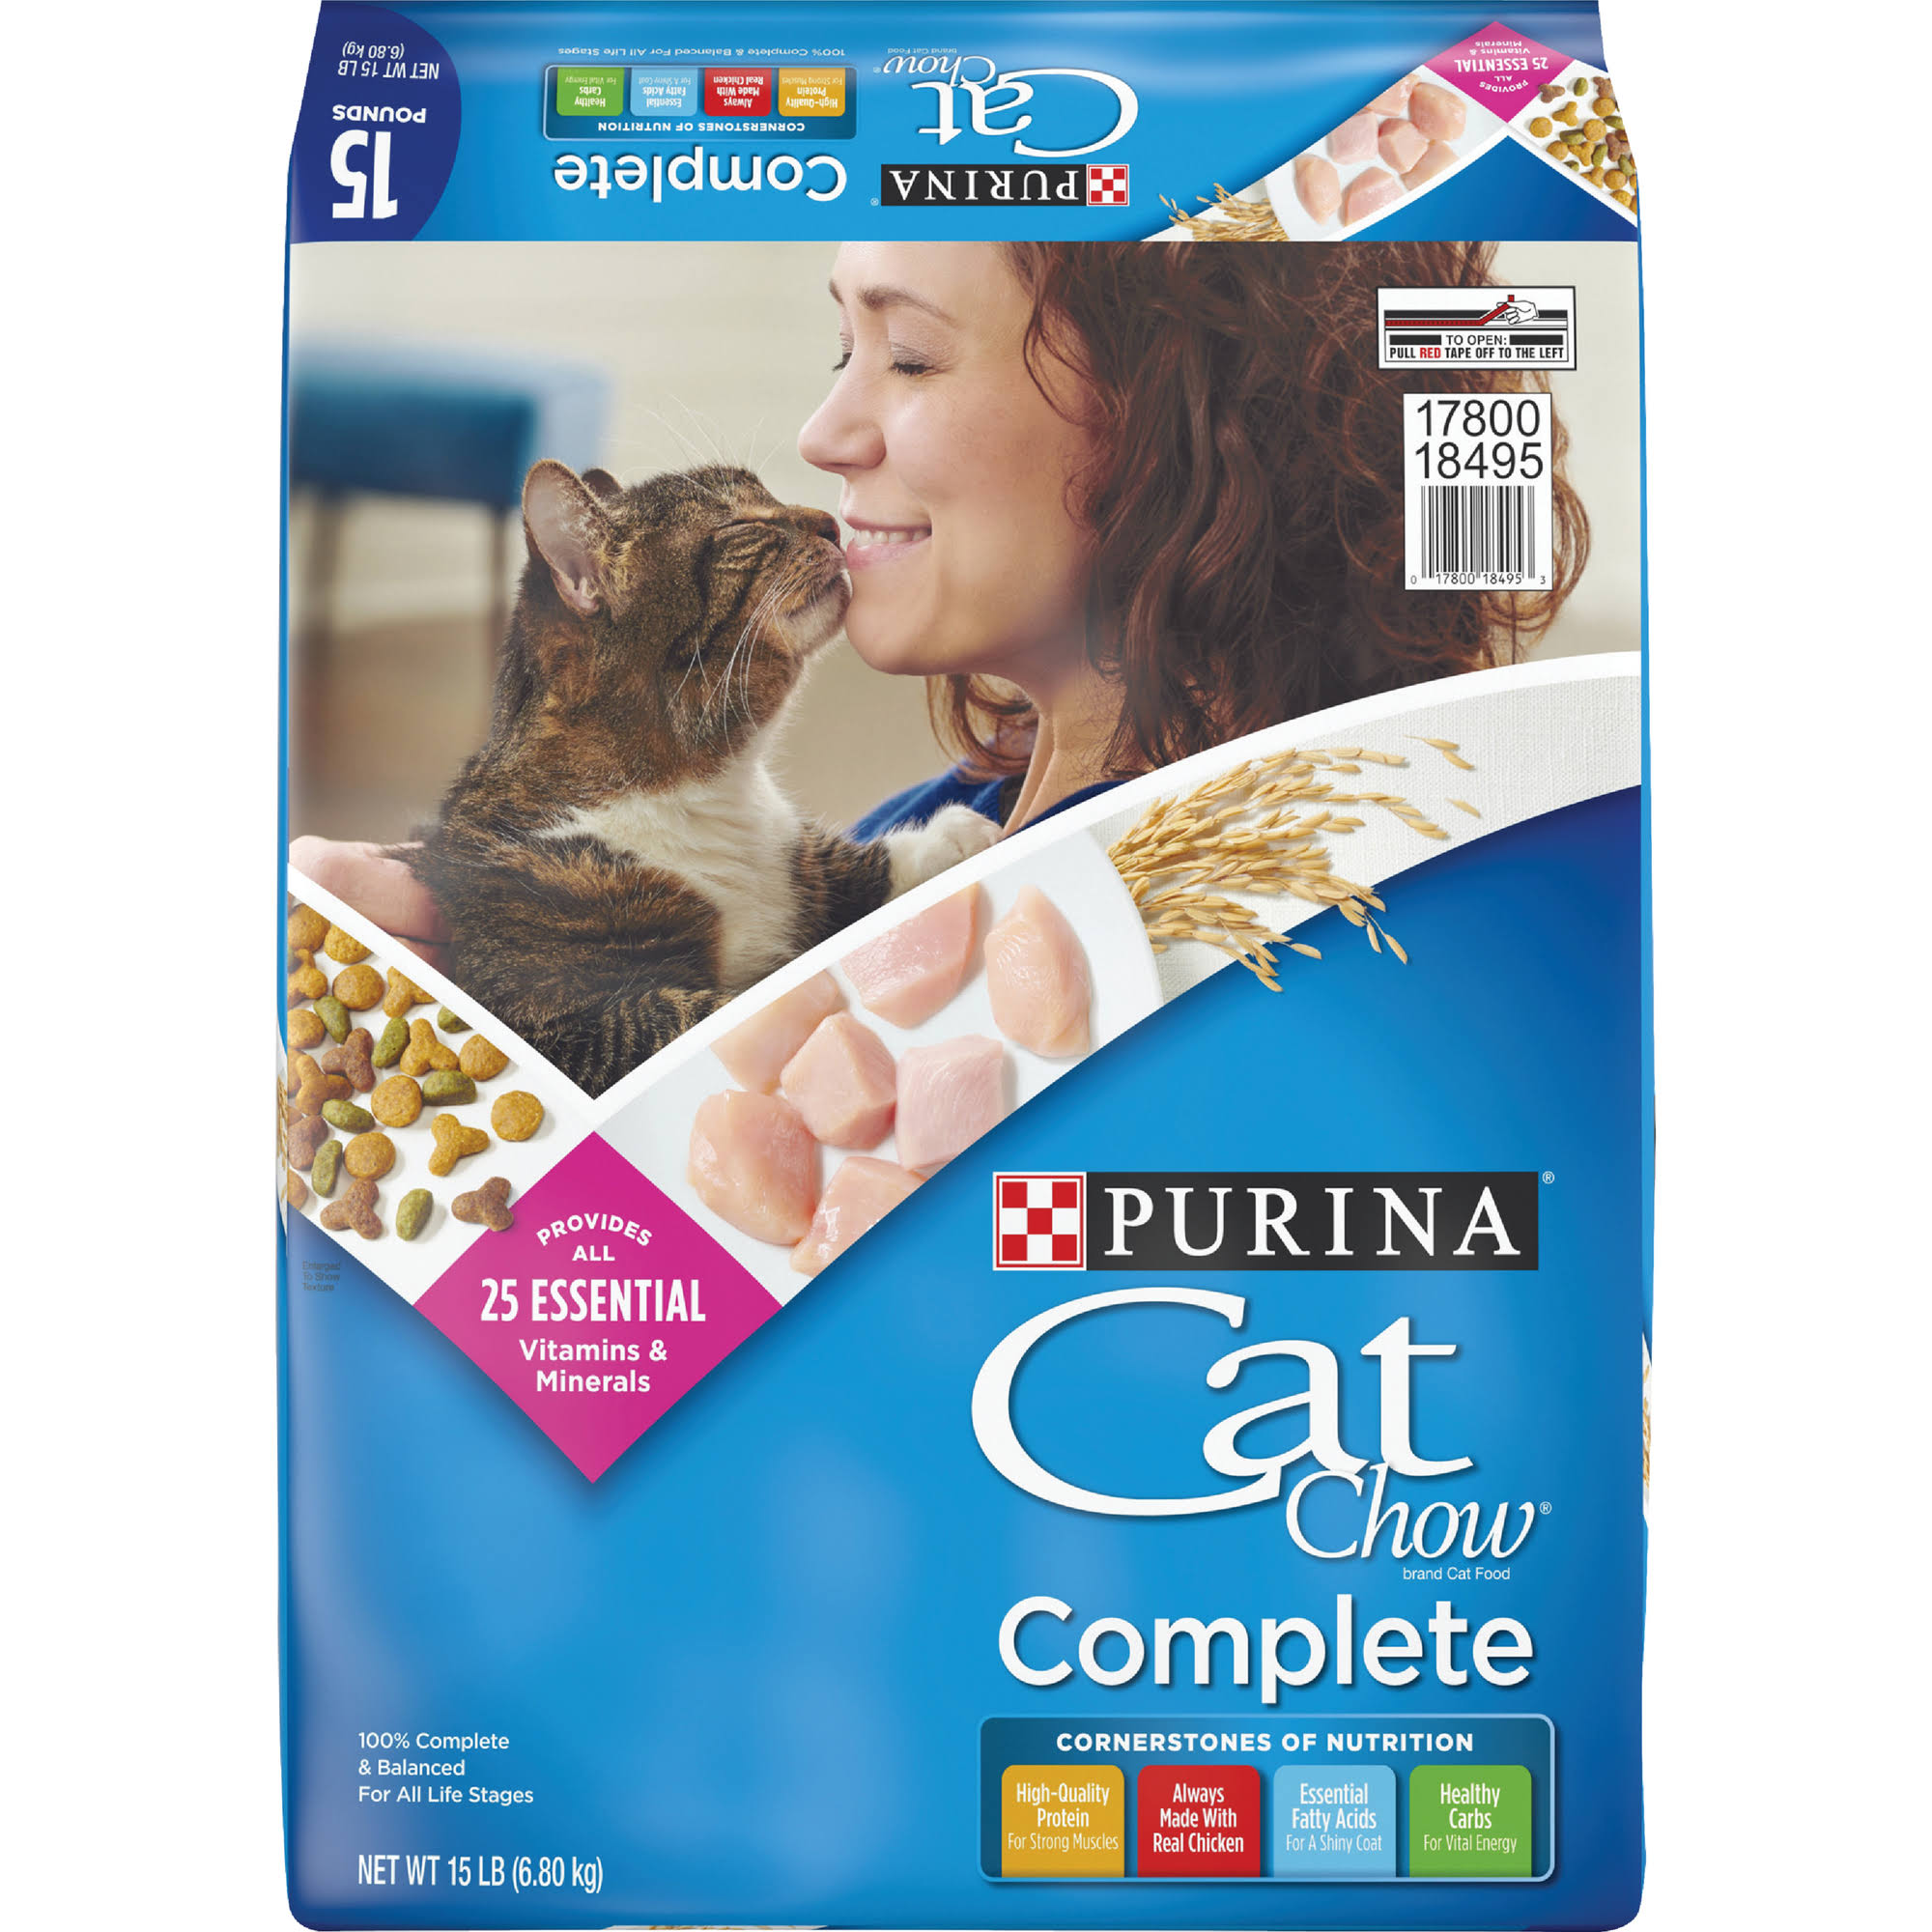 Purina Cat Chow 1780018495 Complete Chicken Recipe 15 Pounds Adult Dry Cat Food